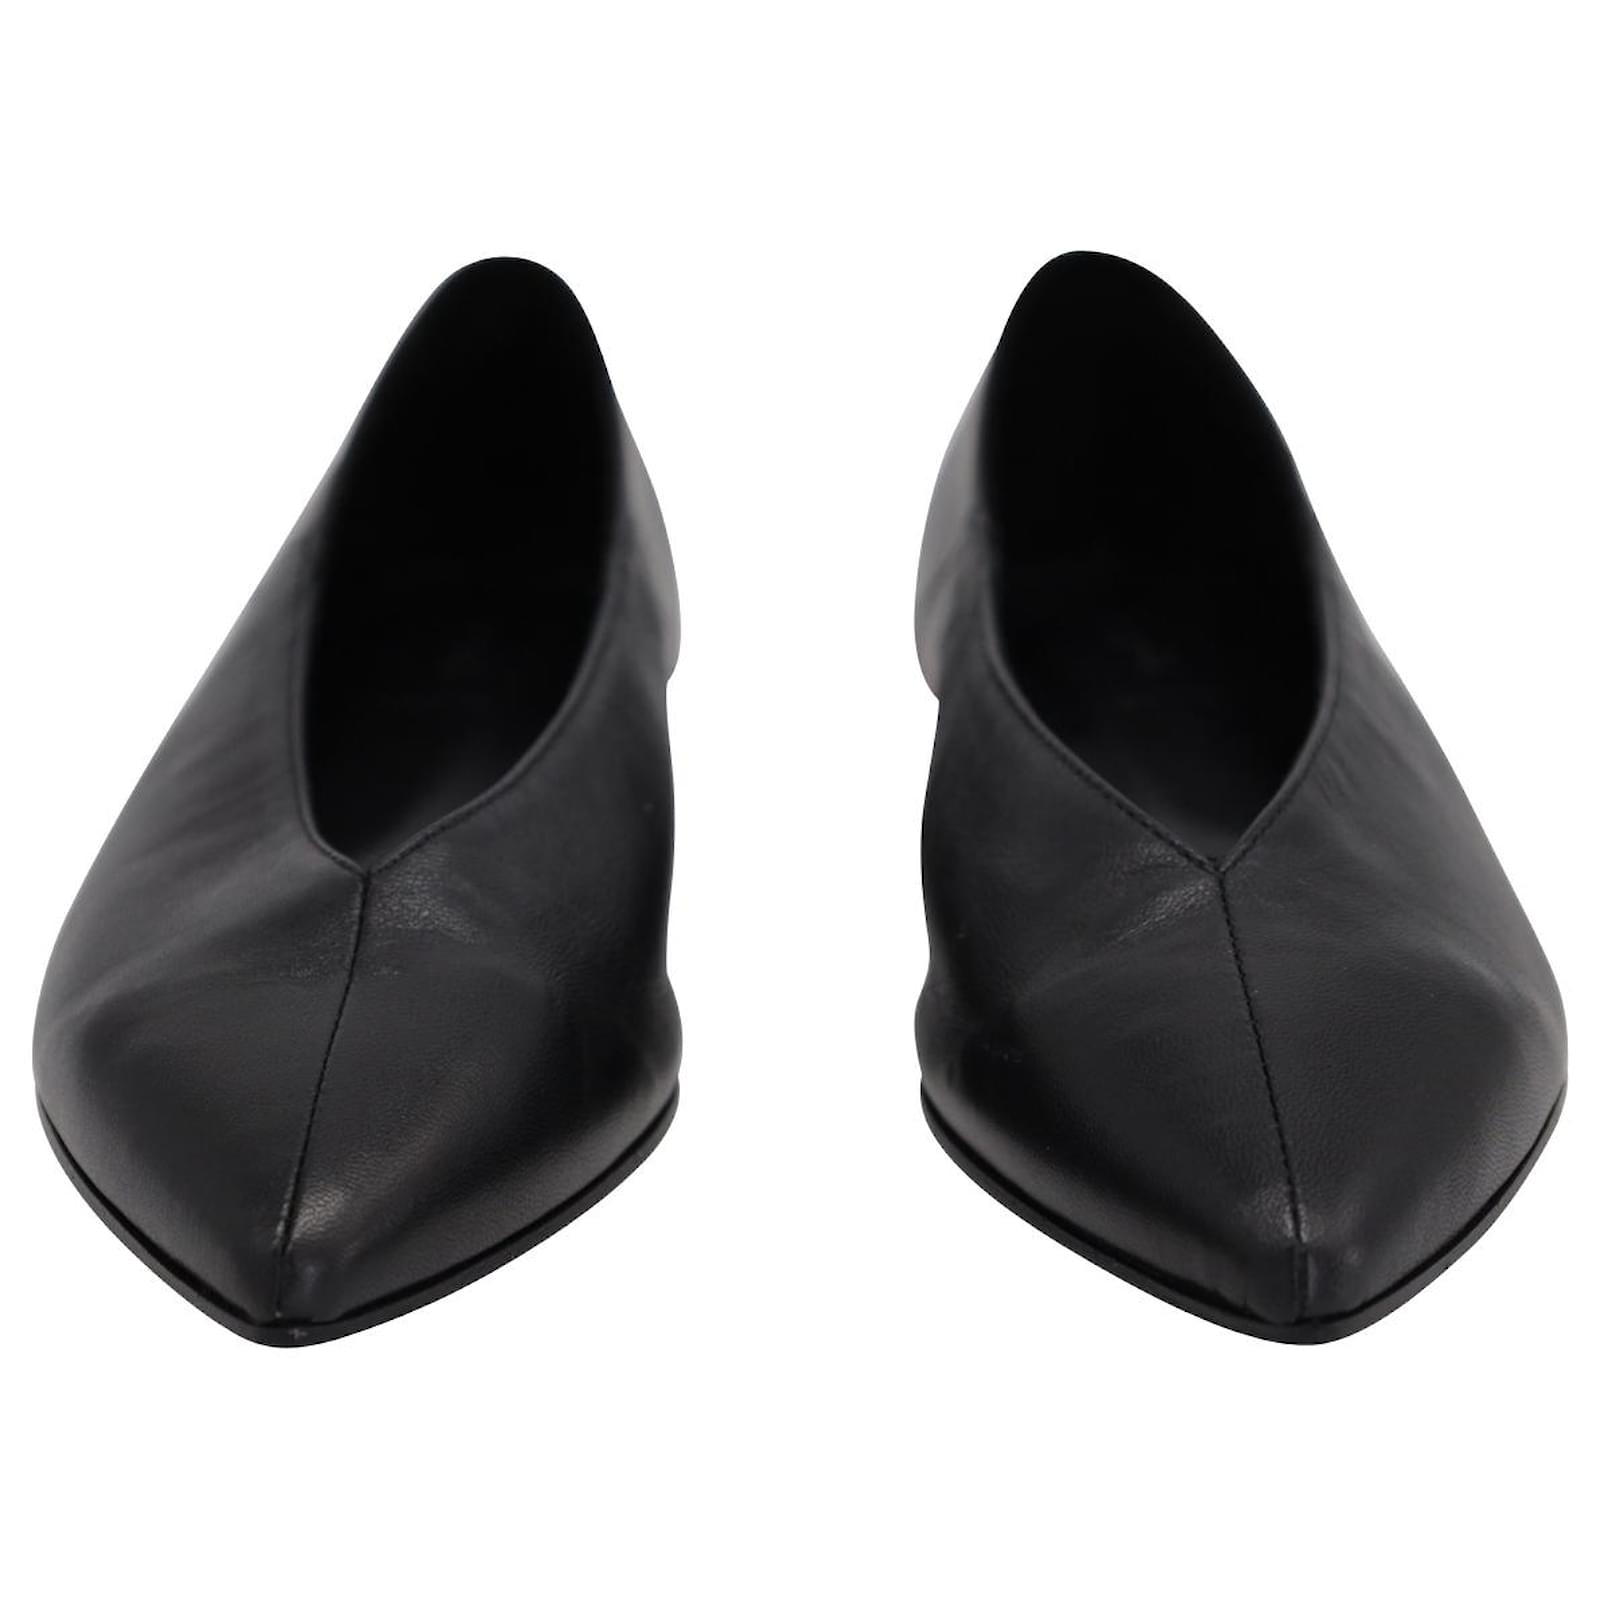 Aeyde  MOA Black Pointed Toe Flat